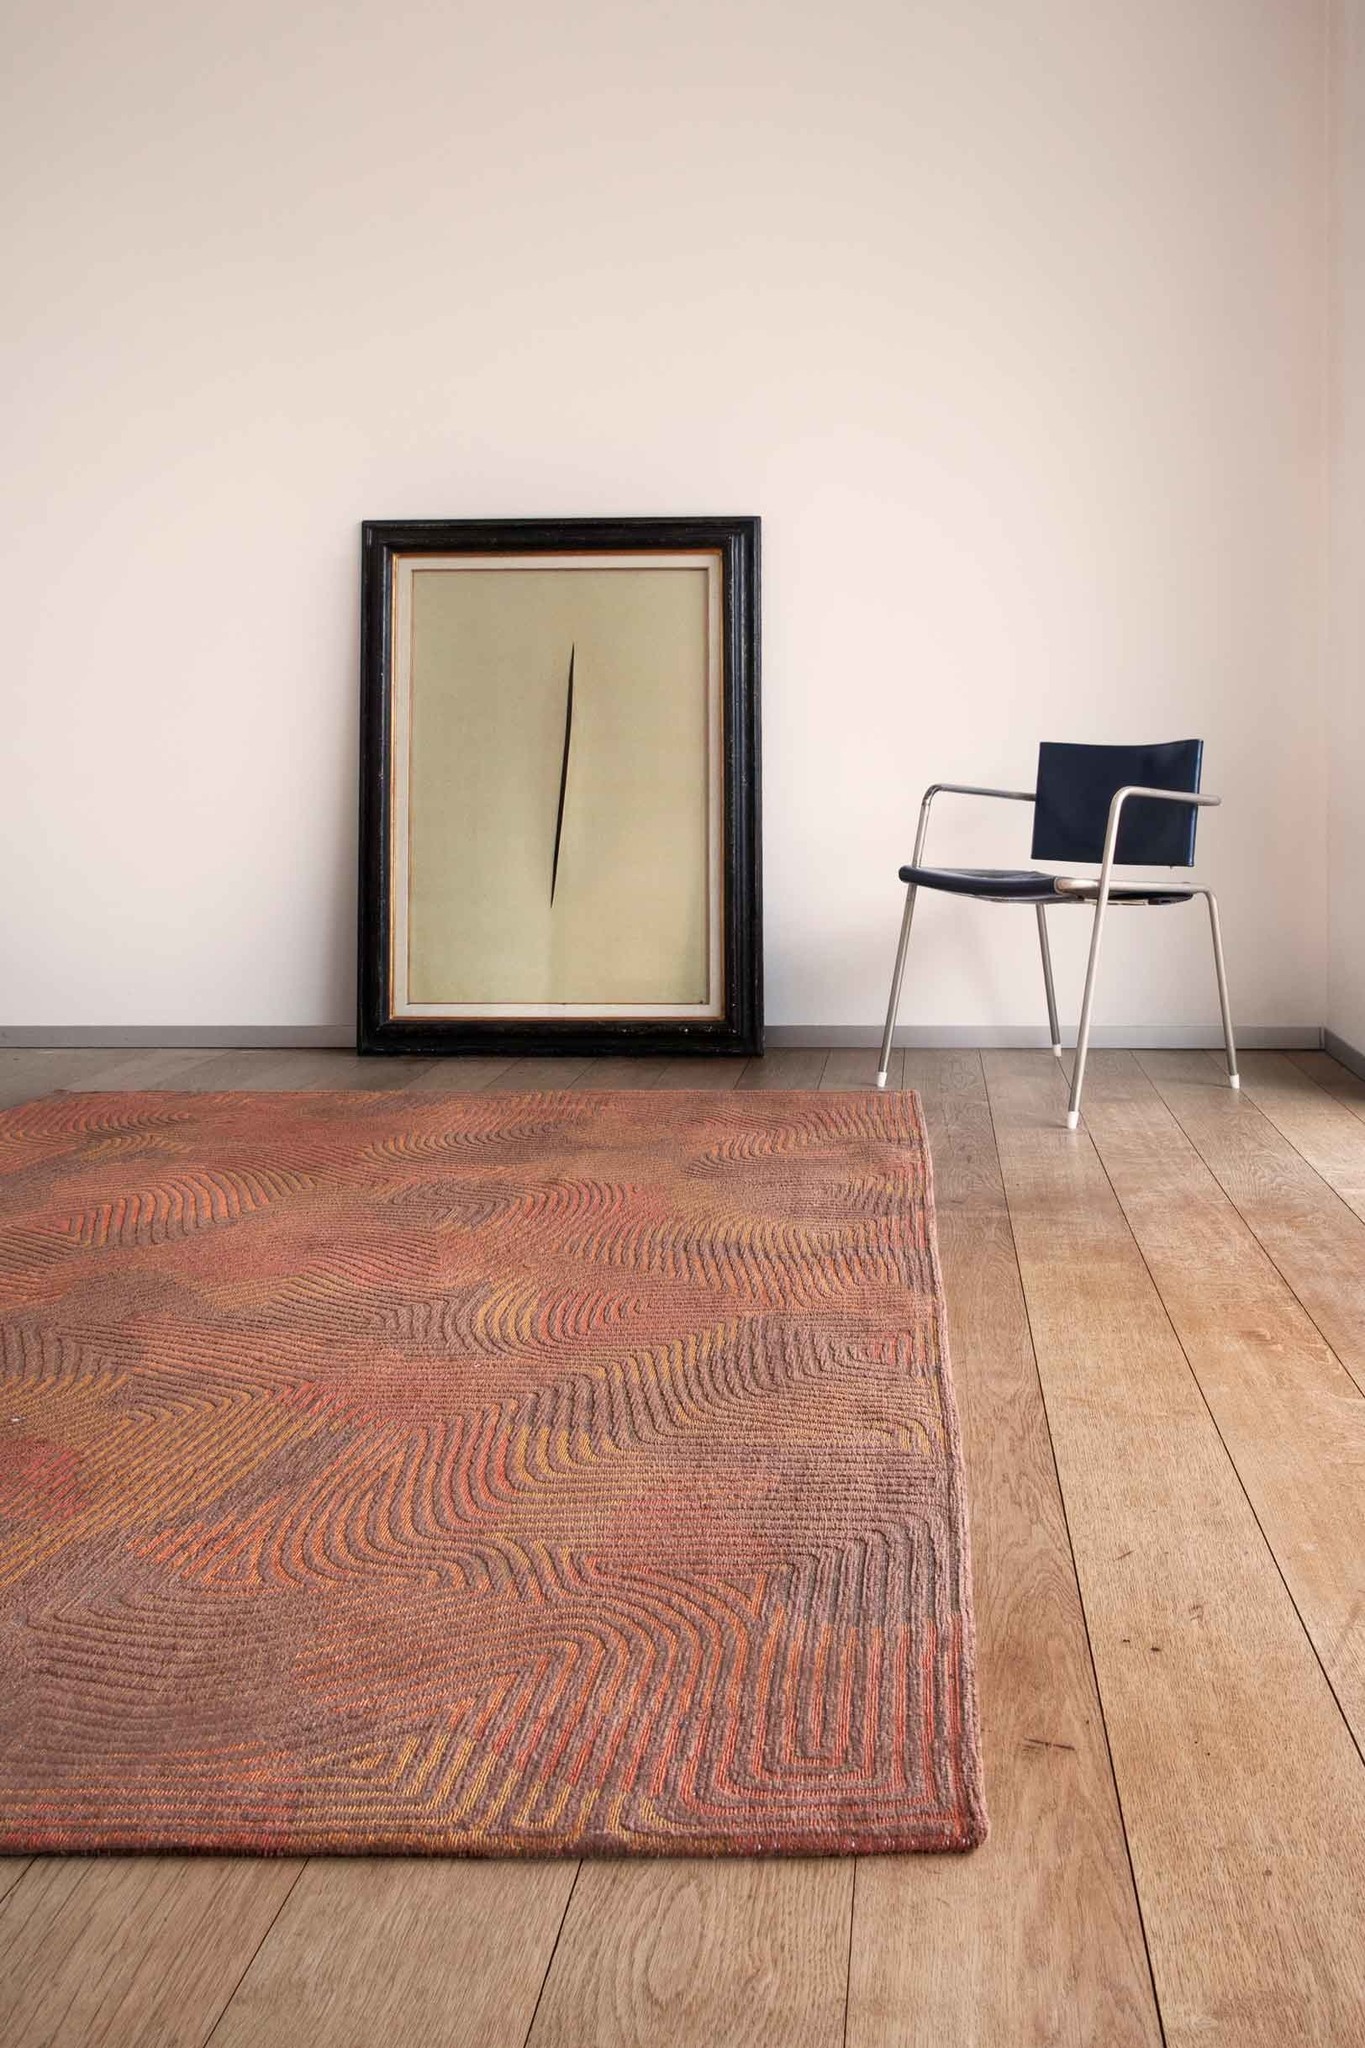 Brown Waves Flatwoven Rug ☞ Size: 6' 7" x 9' 2" (200 x 280 cm)